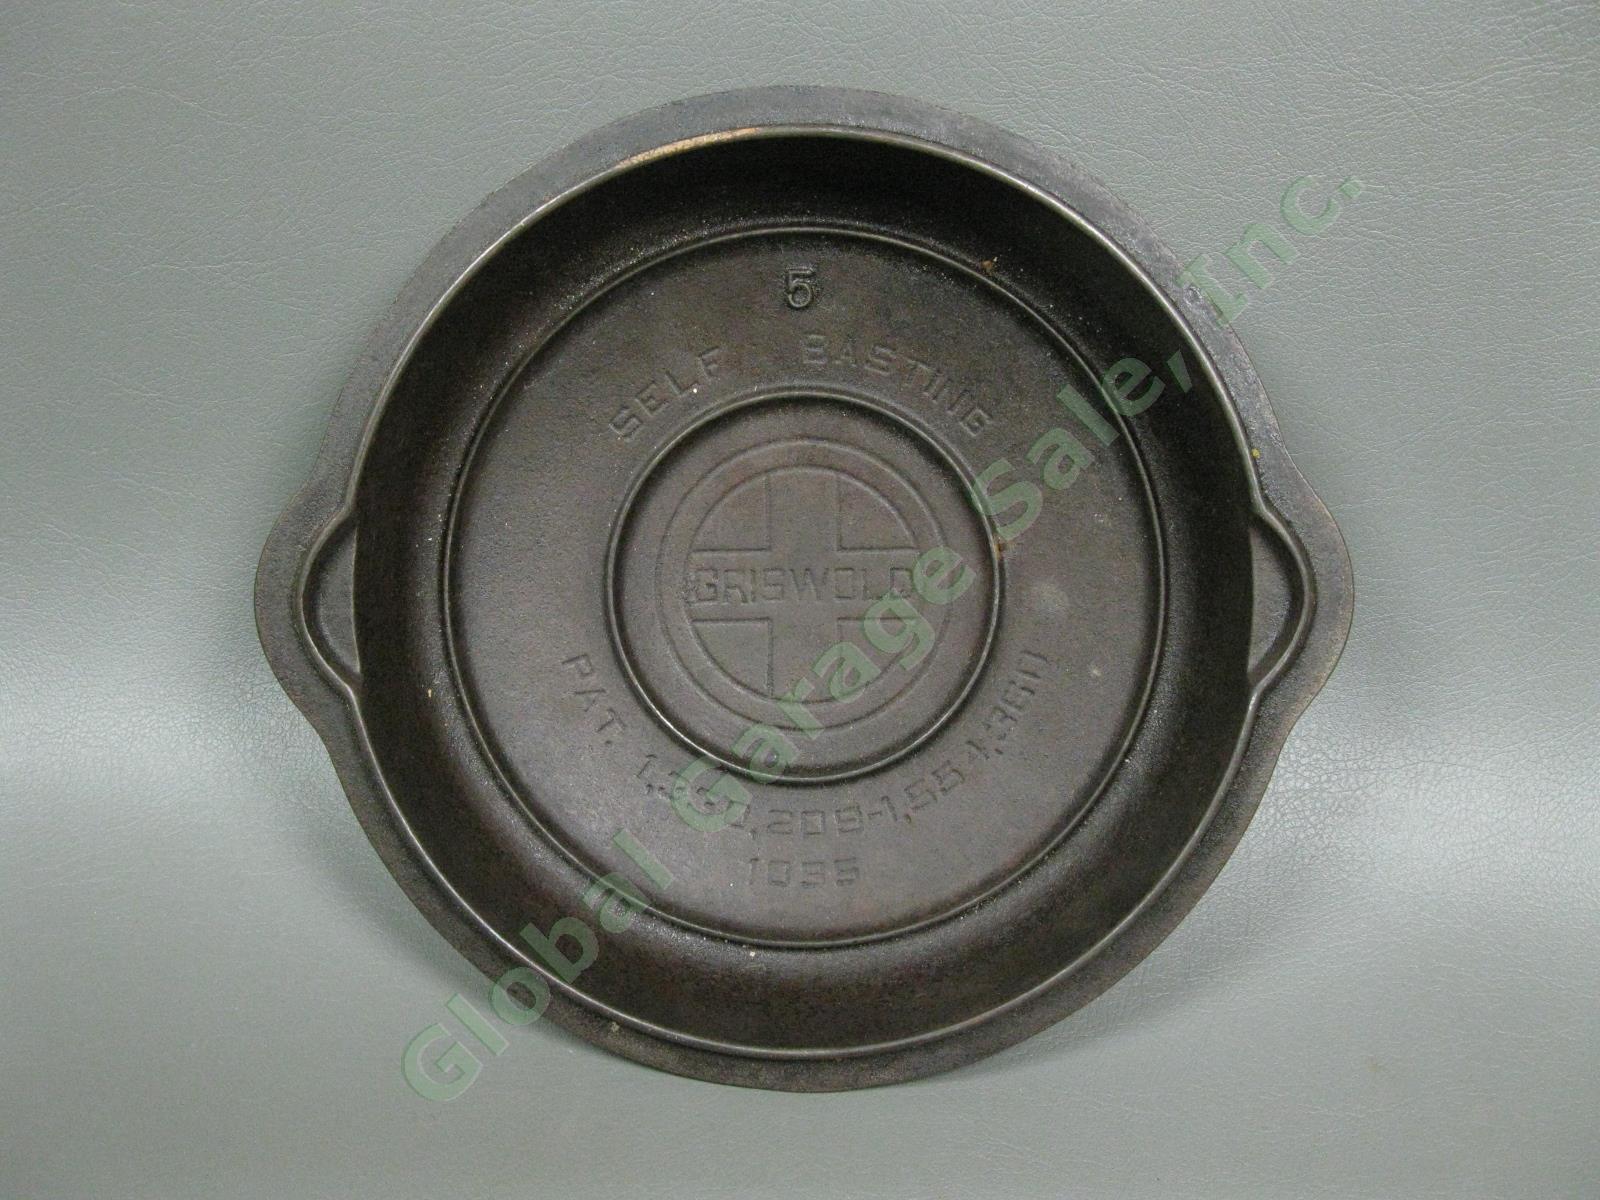 Vintage Griswold No-5 1095 Cast Iron Self-Basting Dutch Oven Lid Cover Cookware